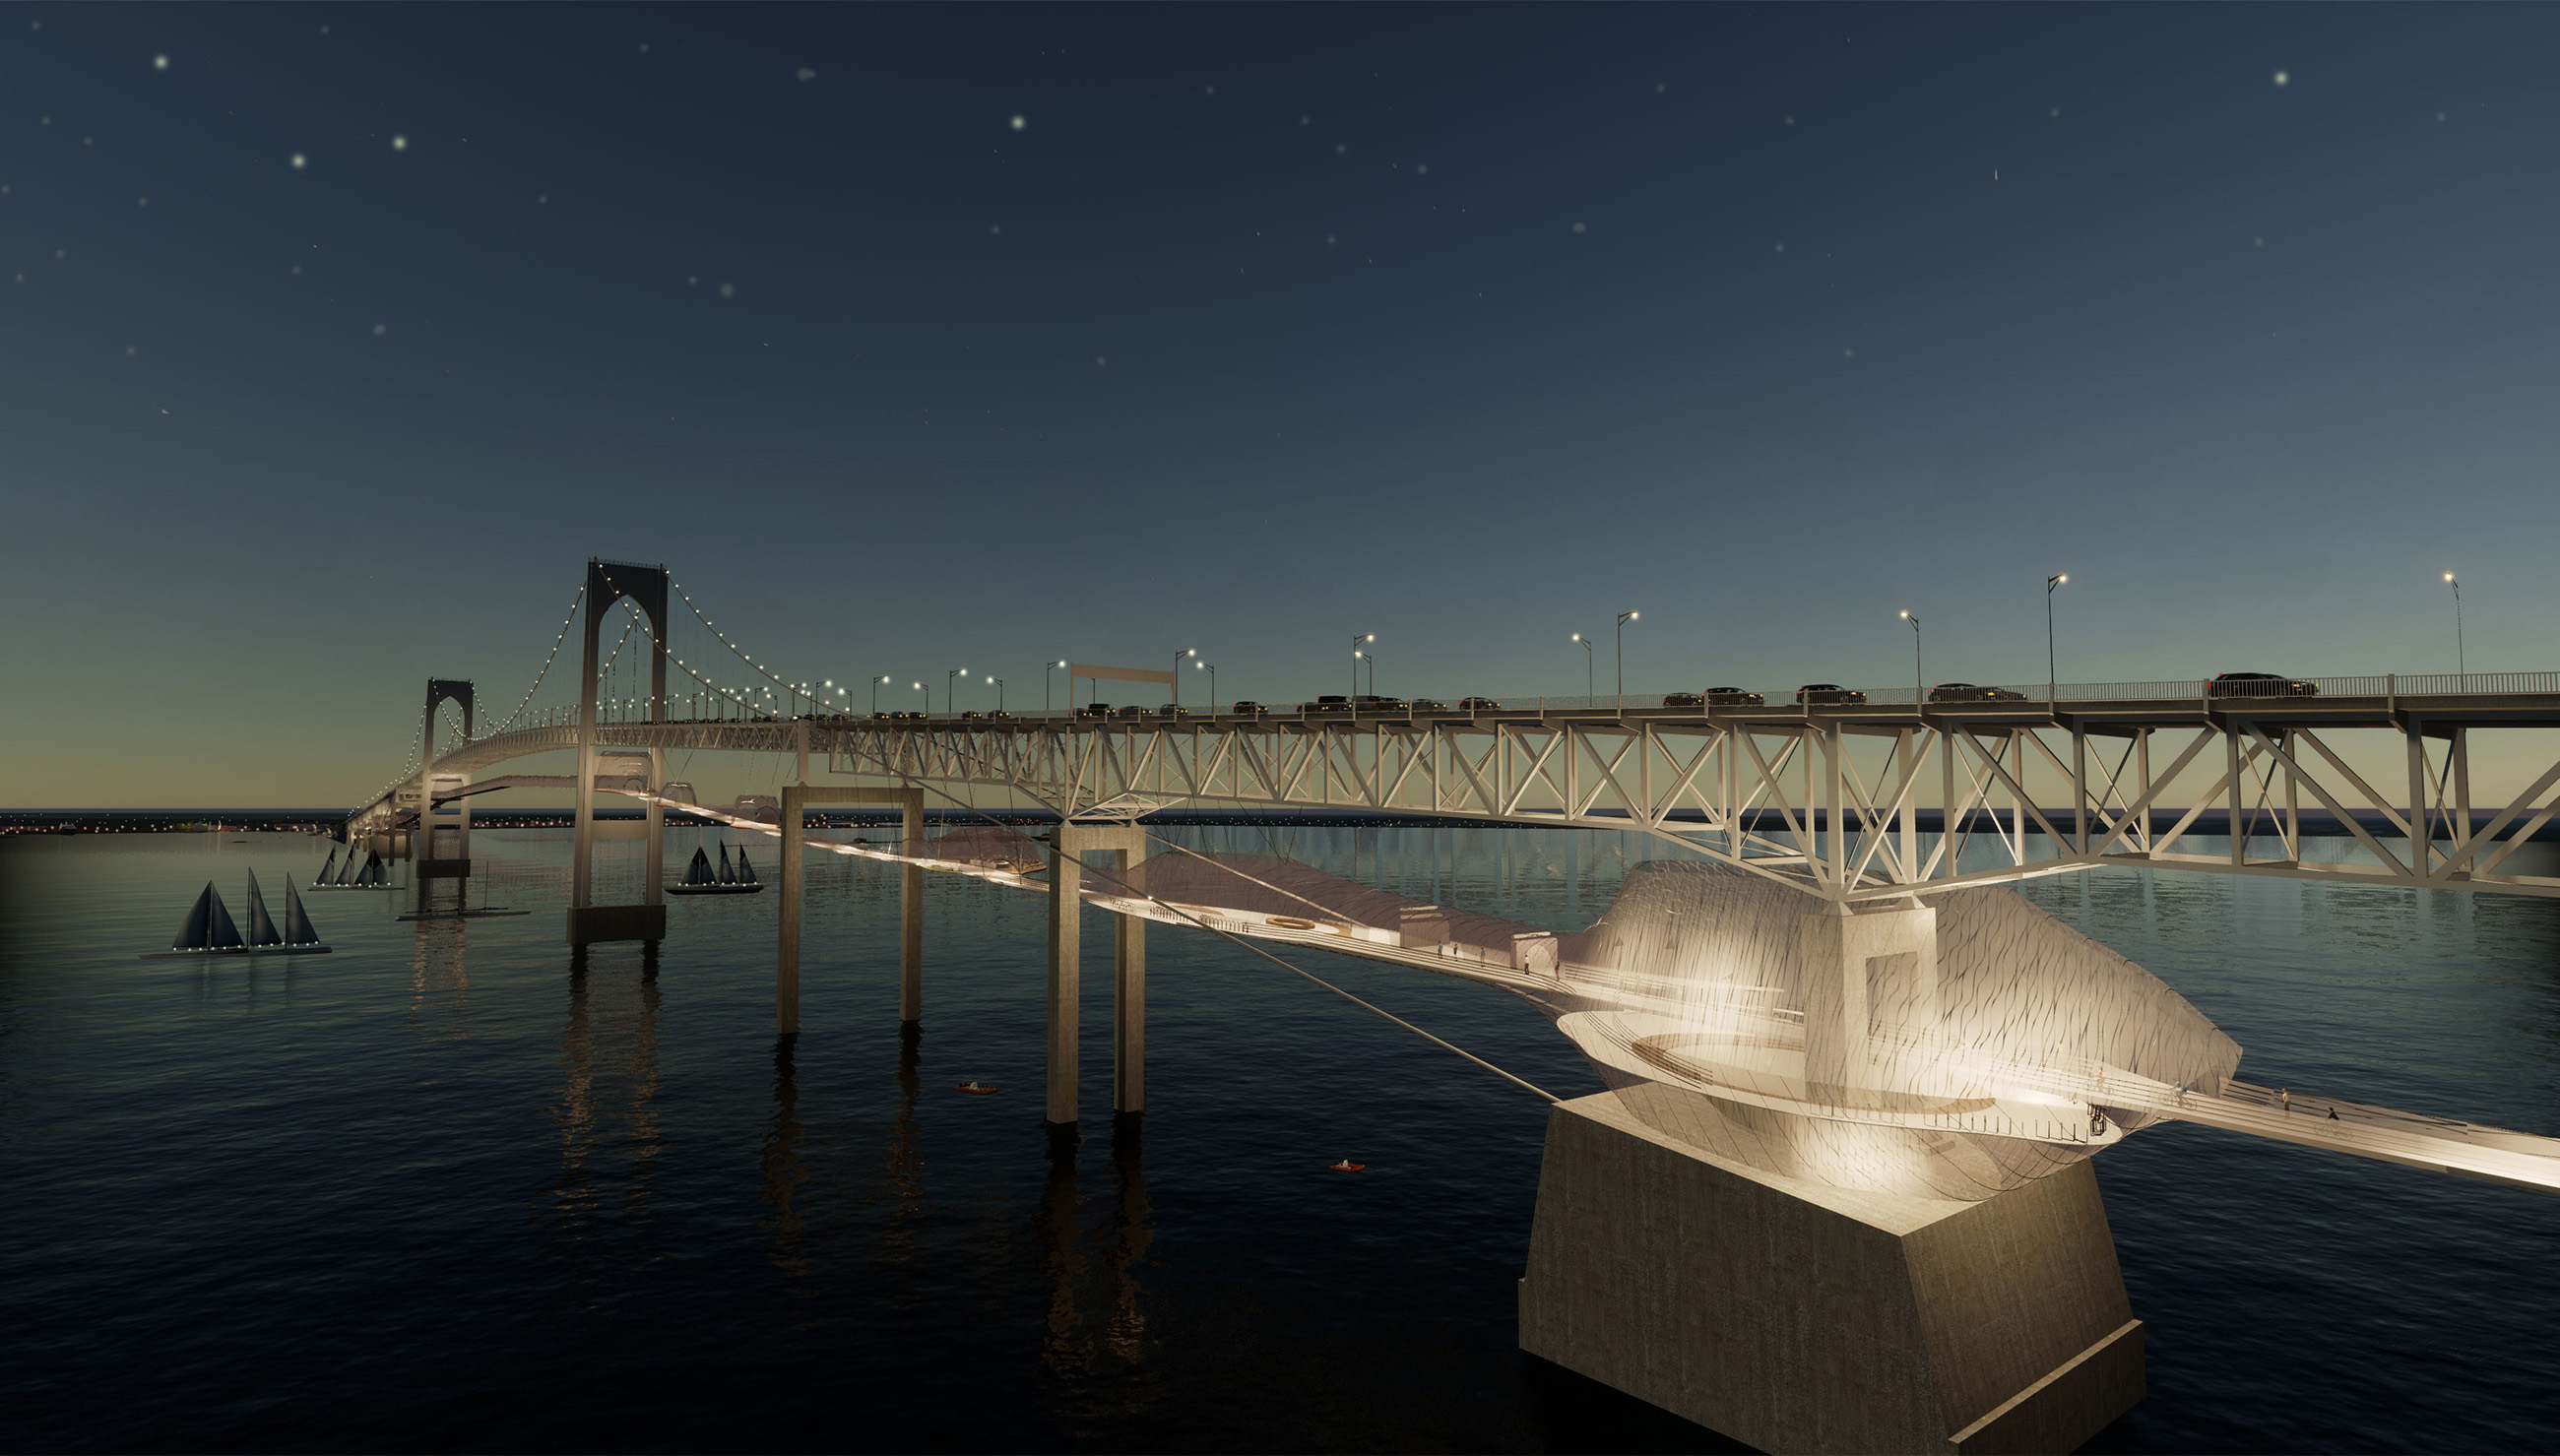 rendering of Pell bridge with imaginative add-ons